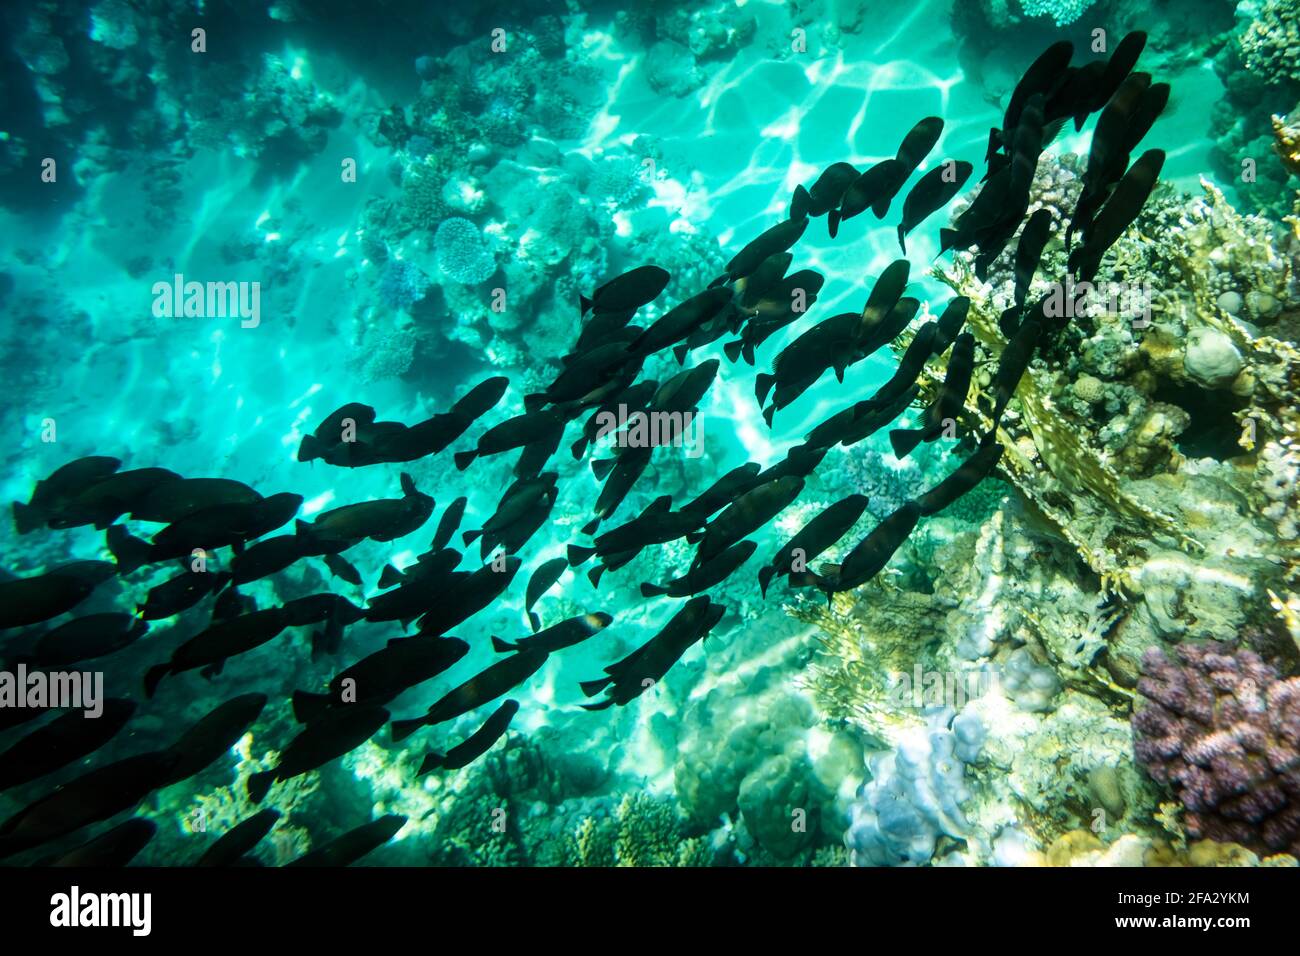 School of black tropical fish on a coral reef Stock Photo